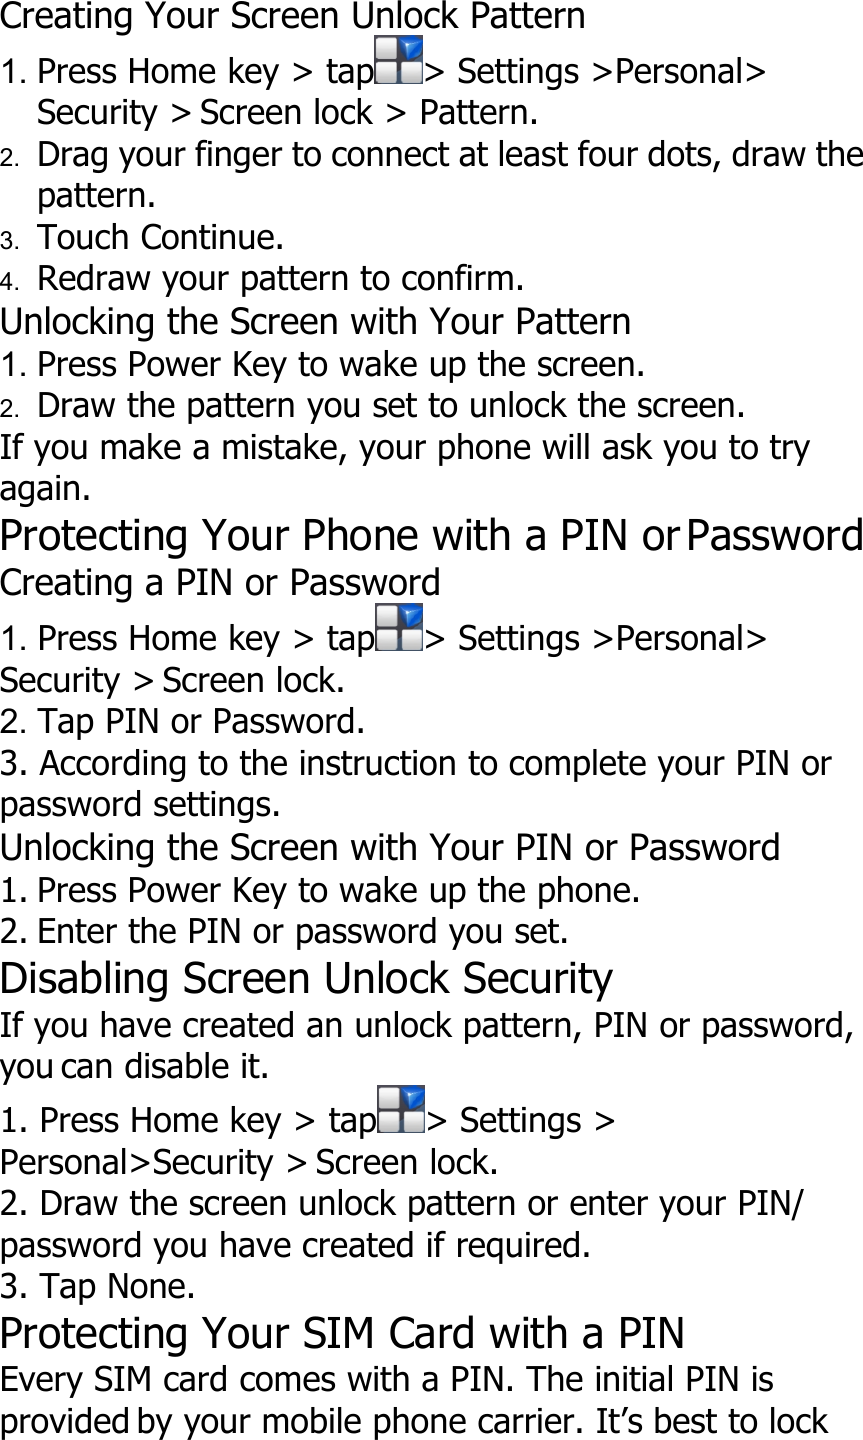 Creating Your Screen Unlock Pattern1. Press Home key &gt; tap &gt; Settings &gt;Personal&gt;Security &gt; Screen lock &gt; Pattern.2. Drag your finger to connect at least four dots, draw thepattern.3. Touch Continue.4. Redraw your pattern to confirm.Unlocking the Screen with Your Pattern1. Press Power Key to wake up the screen.2. Draw the pattern you set to unlock the screen.If you make a mistake, your phone will ask you to tryagain.Protecting Your Phone with a PIN or PasswordCreating a PIN or Password1. Press Home key &gt; tap &gt; Settings &gt;Personal&gt;Security &gt; Screen lock.2. Tap PIN or Password.3. According to the instruction to complete your PIN orpassword settings.Unlocking the Screen with Your PIN or Password1. Press Power Key to wake up the phone.2. Enter the PIN or password you set.Disabling Screen Unlock SecurityIf you have created an unlock pattern, PIN or password,you can disable it.1. Press Home key &gt; tap &gt; Settings &gt;Personal&gt;Security &gt; Screen lock.2. Draw the screen unlock pattern or enter your PIN/password you have created if required.3. Tap None.Protecting Your SIM Card with a PINEvery SIM card comes with a PIN. The initial PIN isprovided by your mobile phone carrier. It’s best to lock